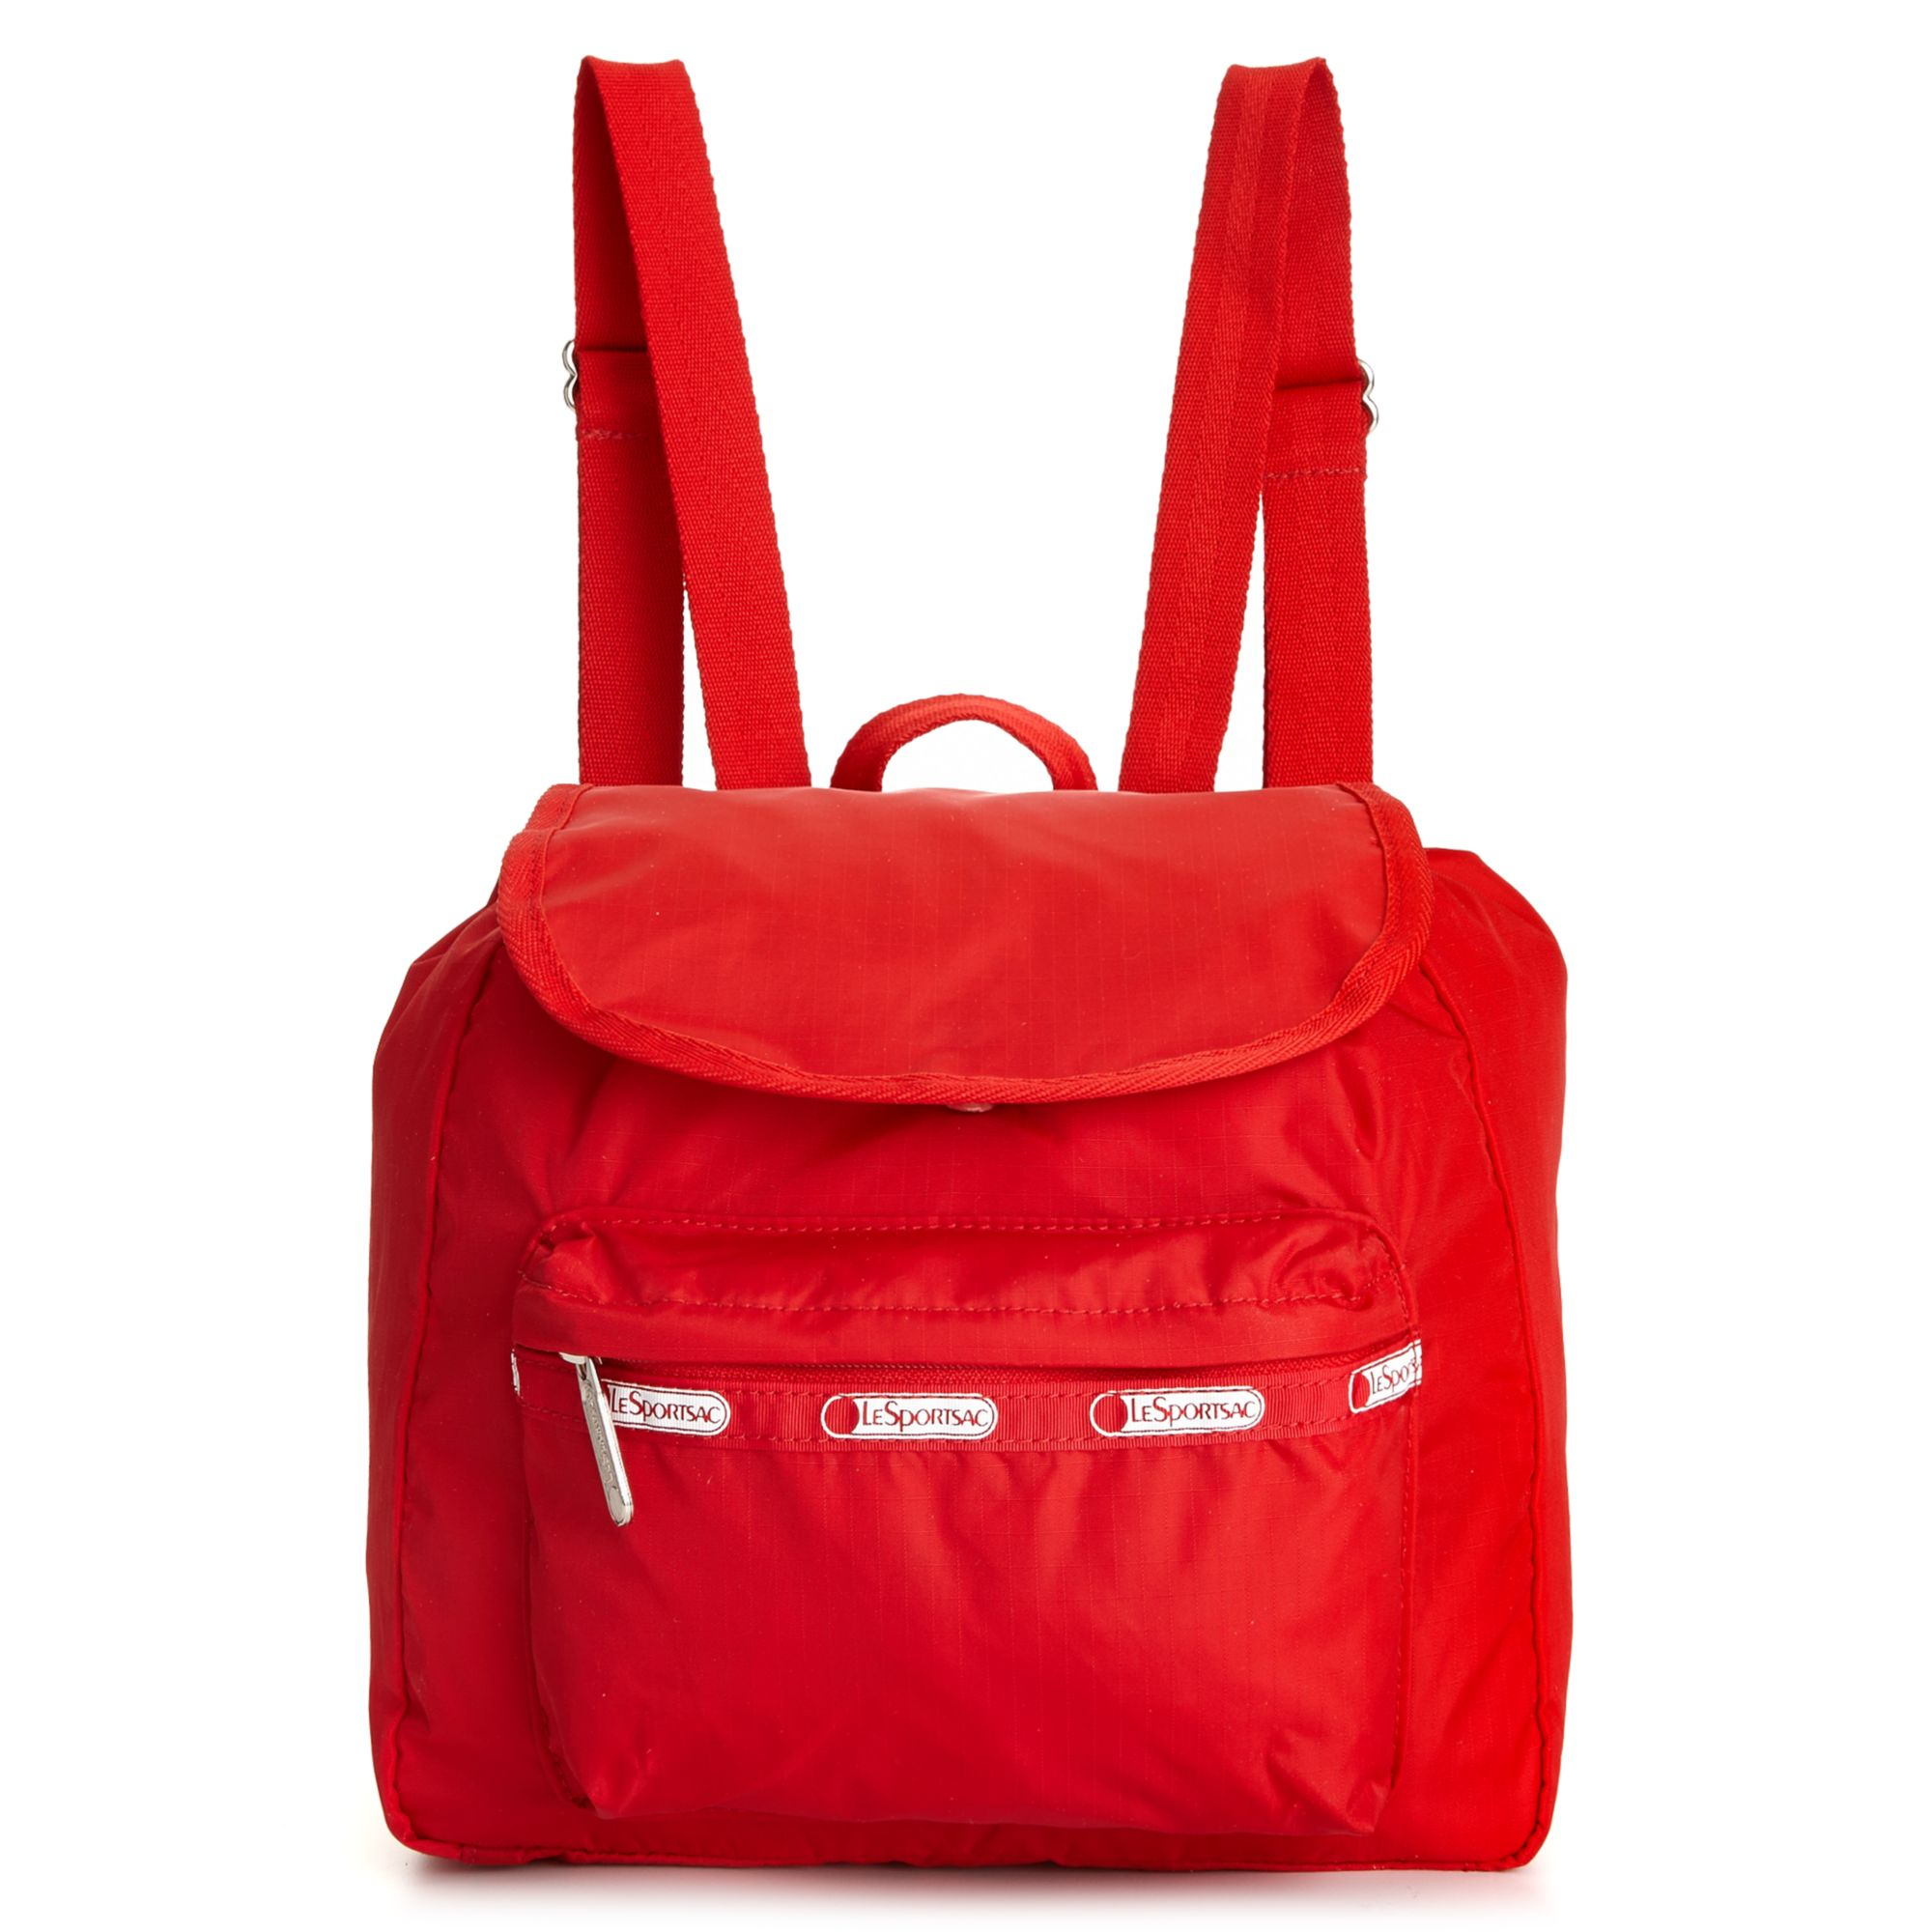 Lyst - Lesportsac Small Edie Backpack in Red